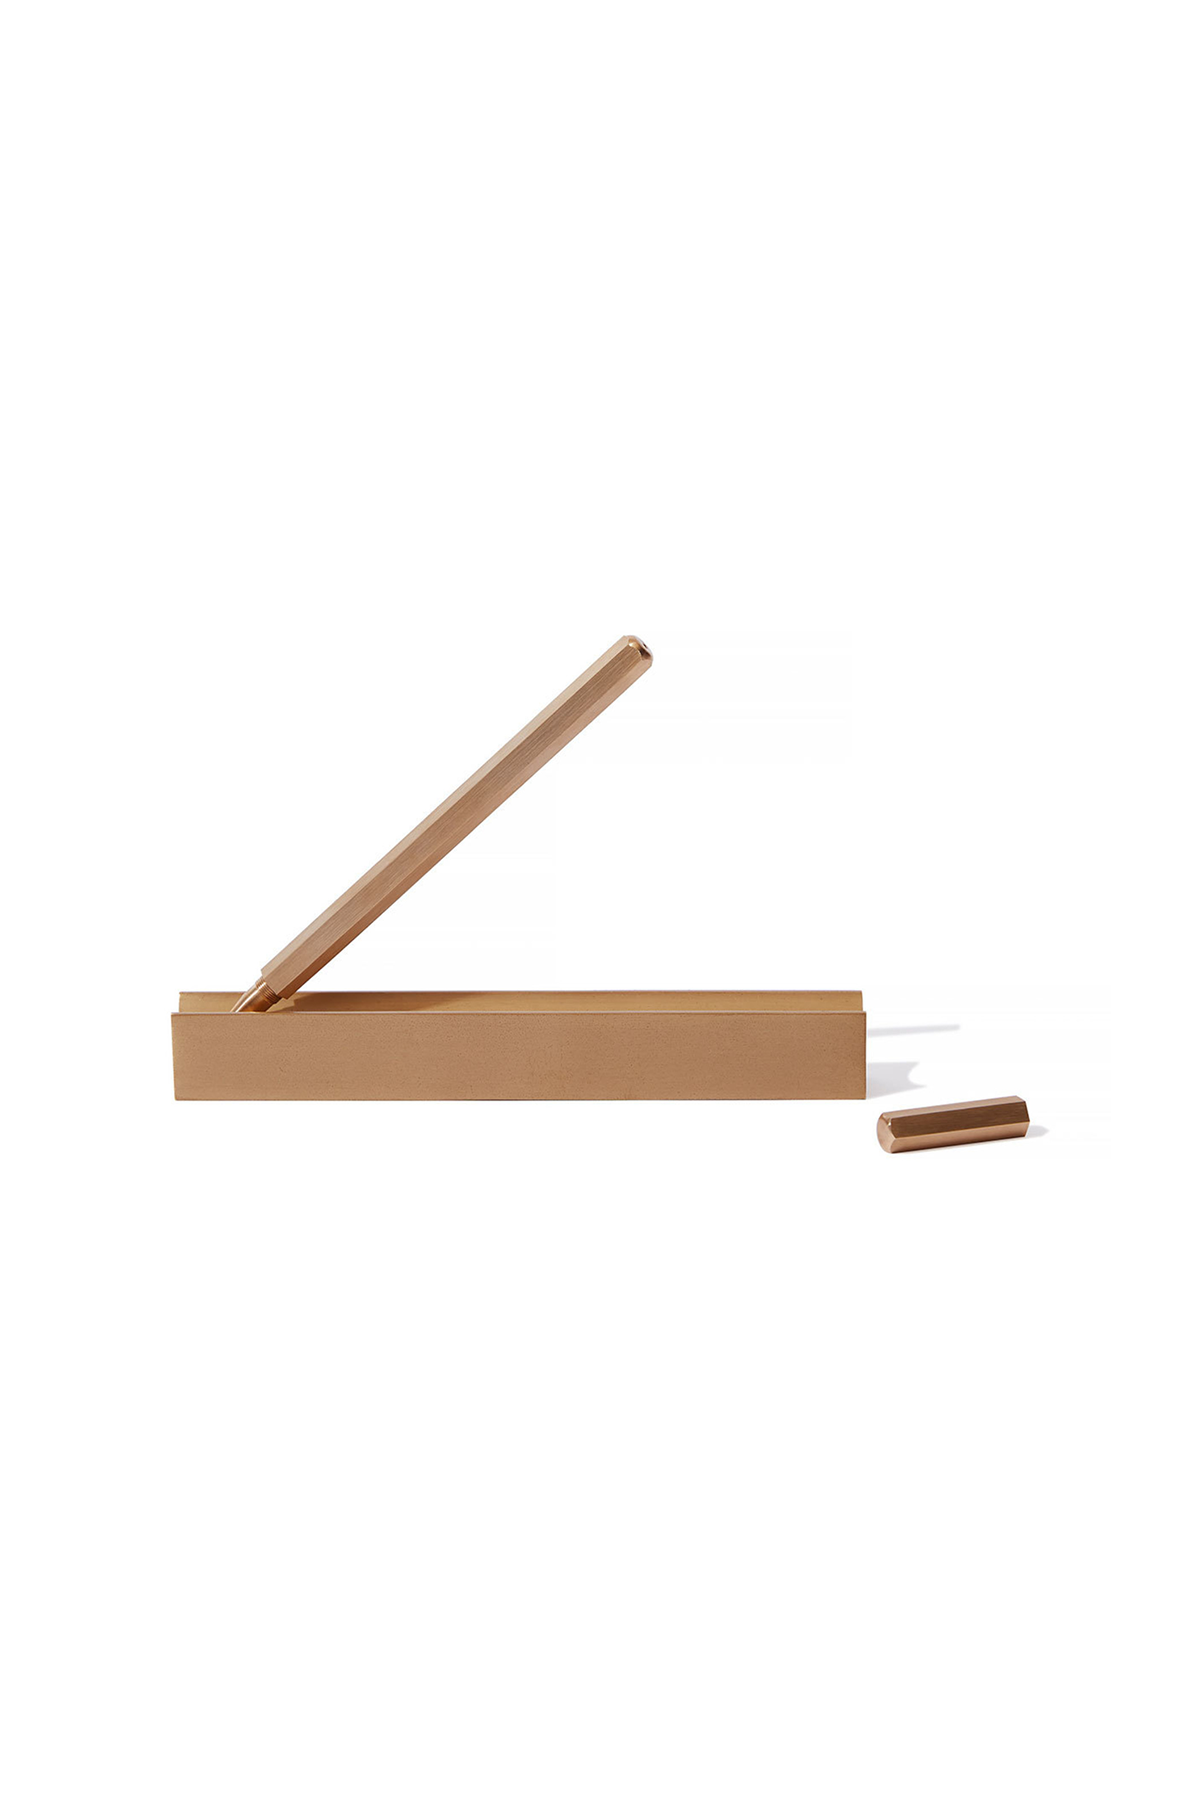 Brass-Hex-Pen-stand-1200W.png